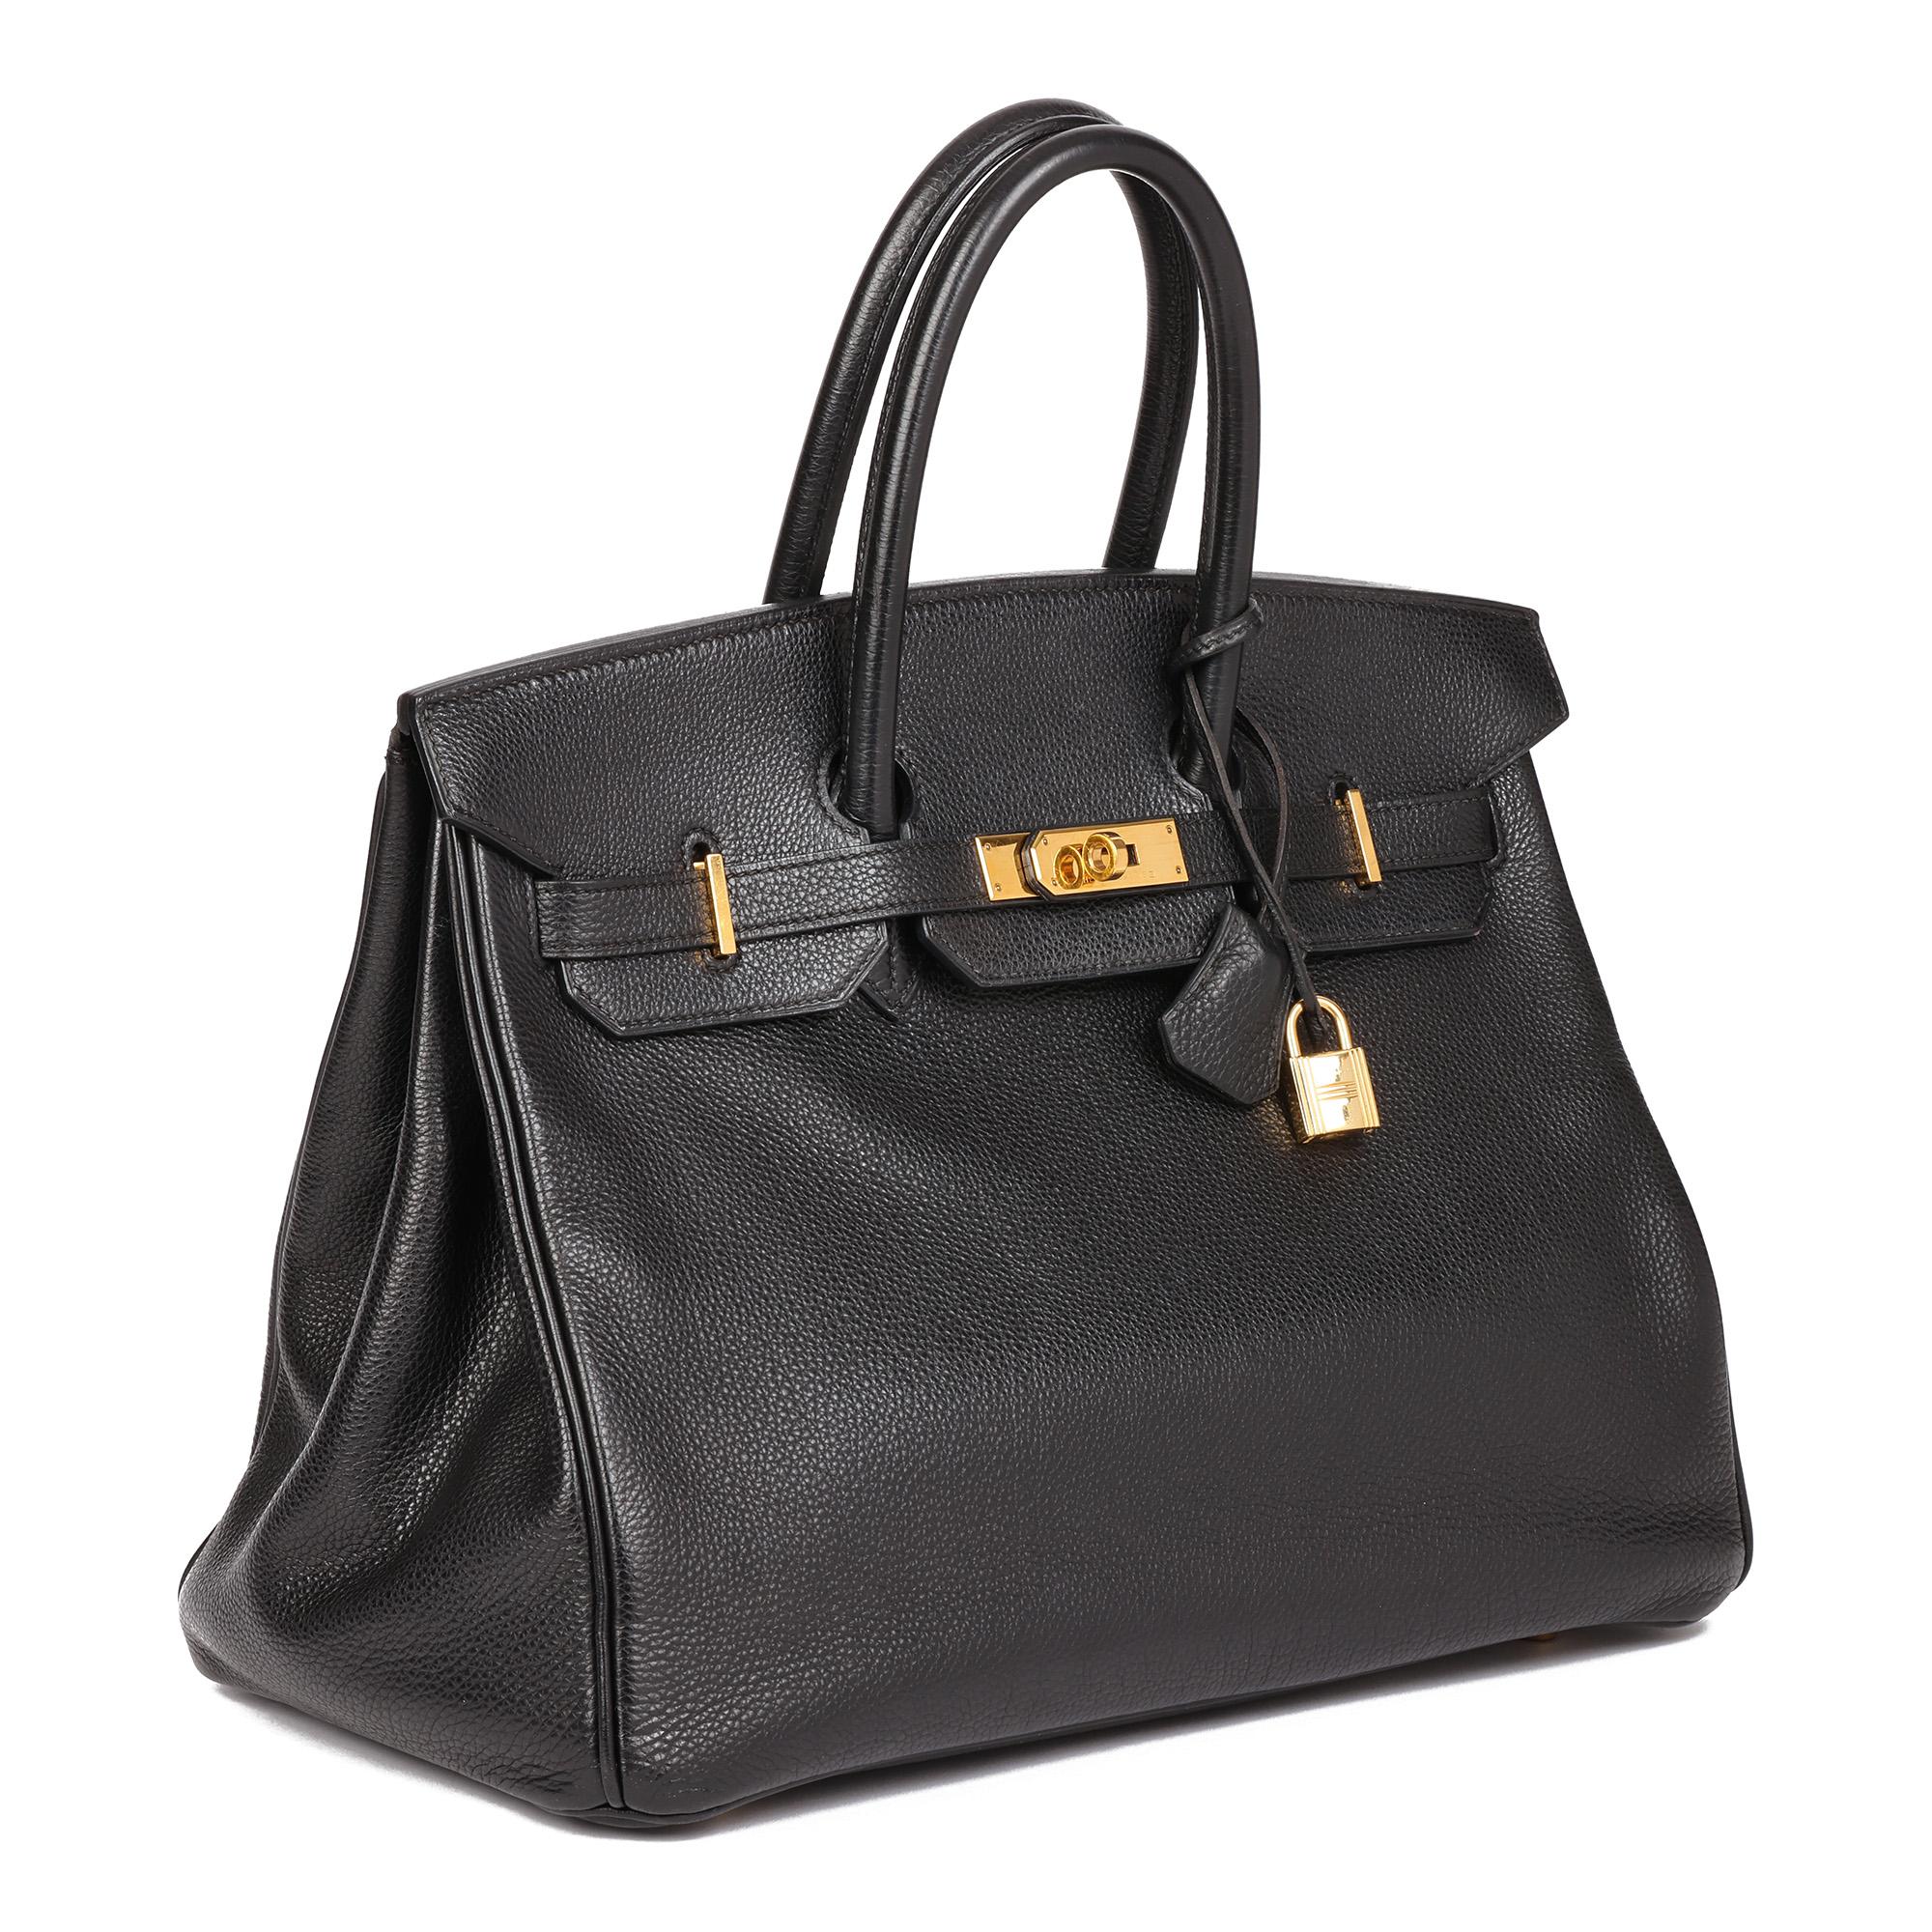 HERMÈS
Black Togo Leather Vintage Birkin 35cm Retourne 

Xupes Reference: HB4710
Serial Number: [D]
Age (Circa): 2000
Accompanied By: Padlock, Keys, Clochette
Authenticity Details: Date Stamp (Made in France)
Gender: Ladies
Type: Tote

Colour: